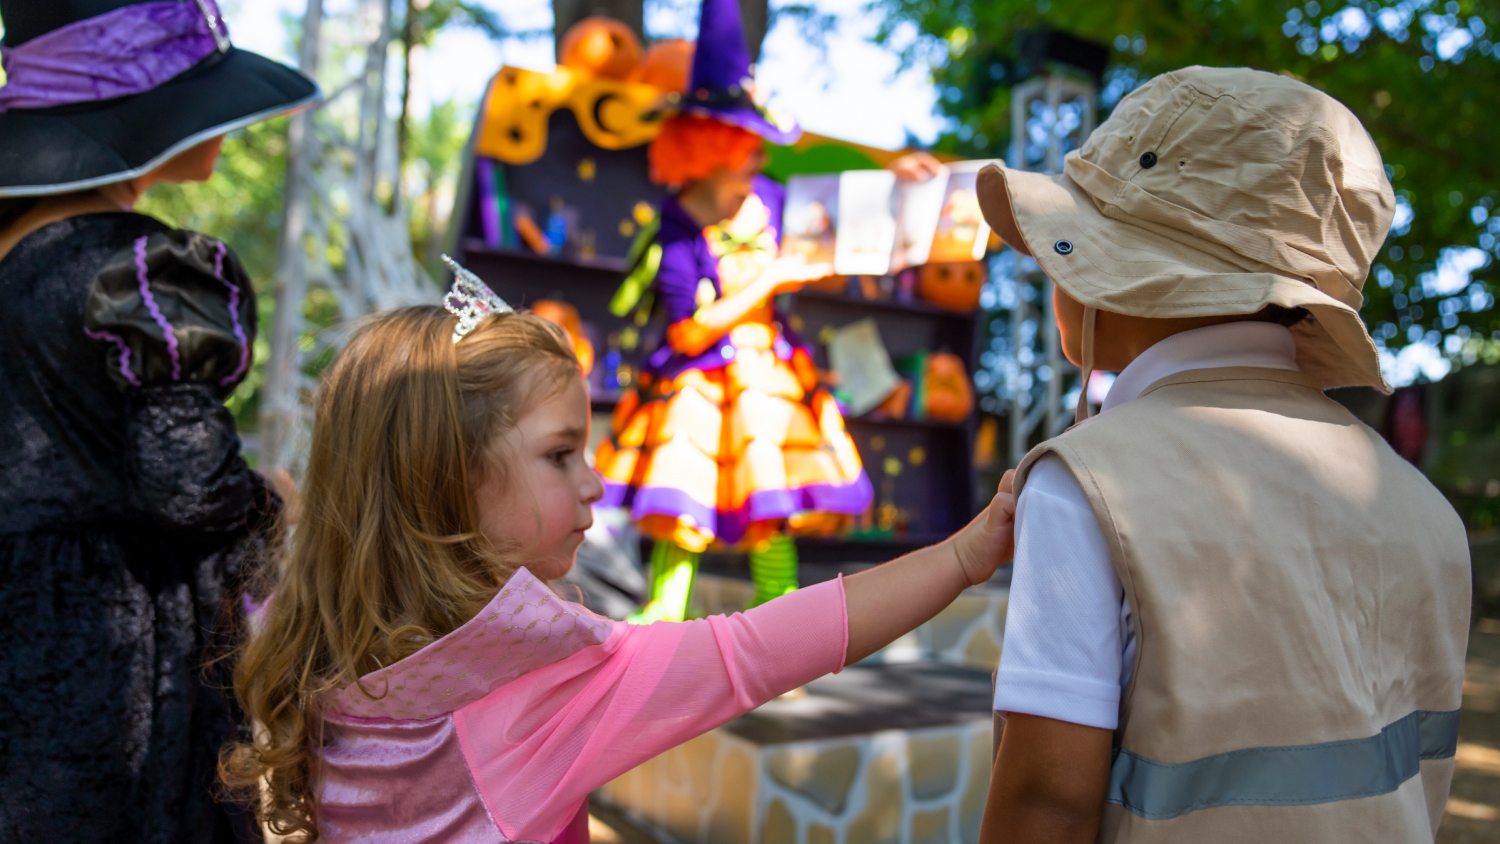 Kids in costume enjoying story time with Kandy the witch-in-training at Busch Gardens Tampa Bay Spooktacular.